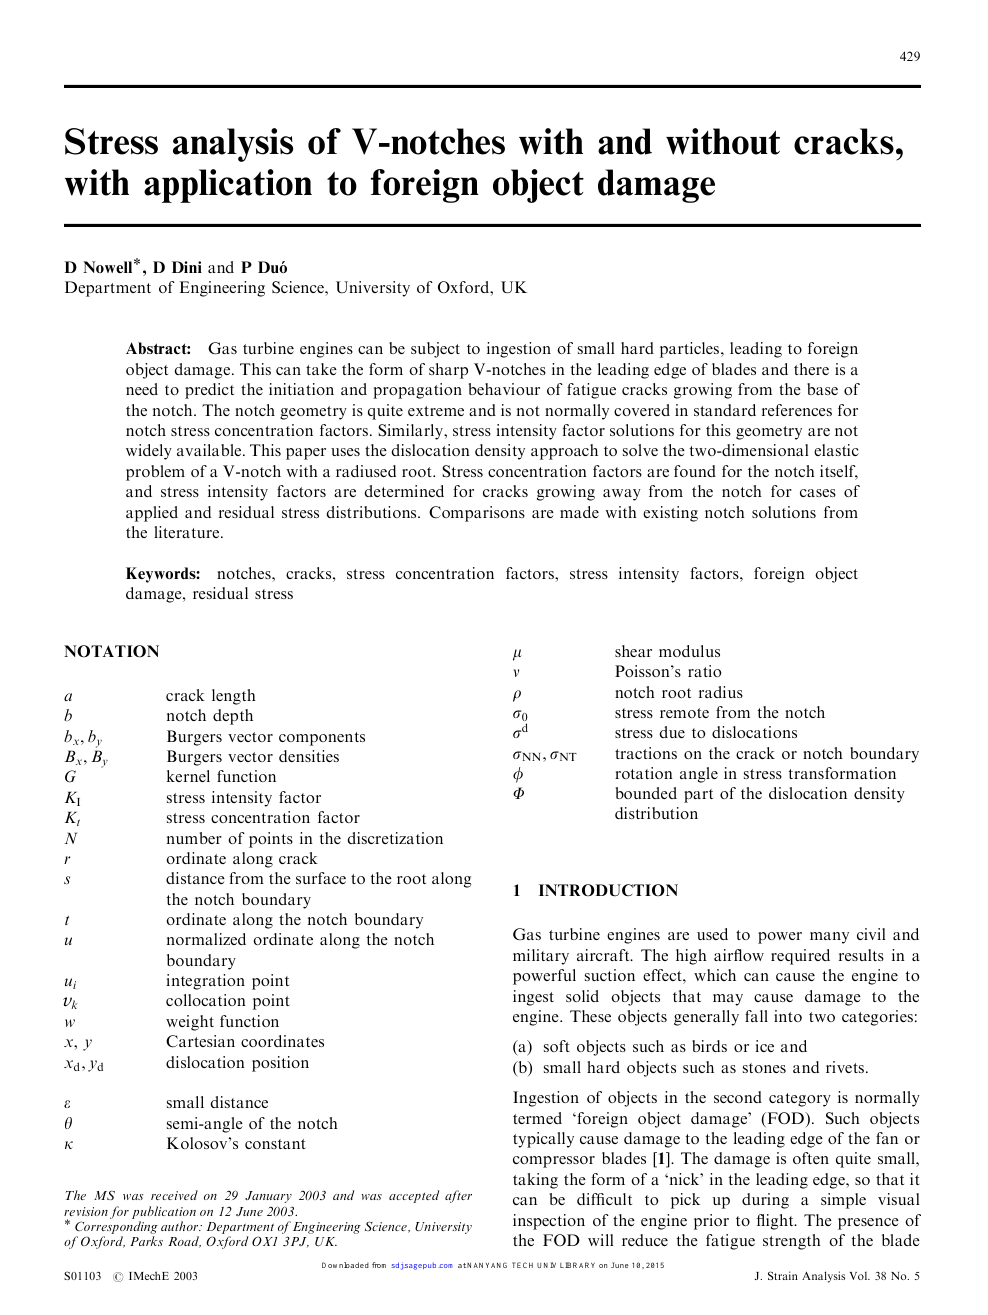 Stress Analysis Of V Notches With And Without Cracks With Application To Foreign Object Damage Topic Of Research Paper In Earth And Related Environmental Sciences Download Scholarly Article Pdf And Read For